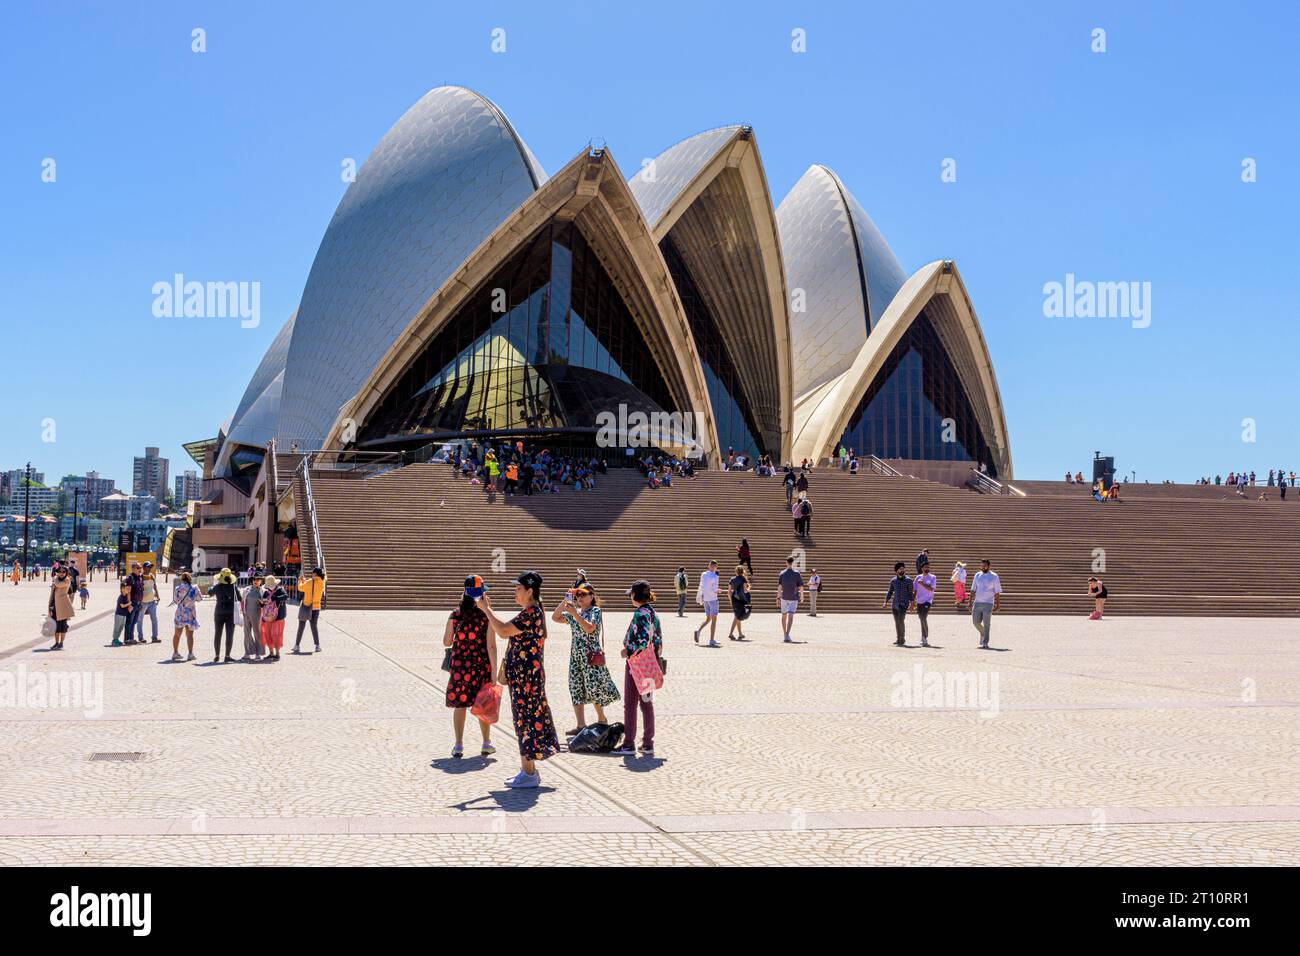 Tourists taking selfies in front of the iconic Sydney Opera House on Bennelong Point, Sydney, New South Wales, Australia Stock Photo